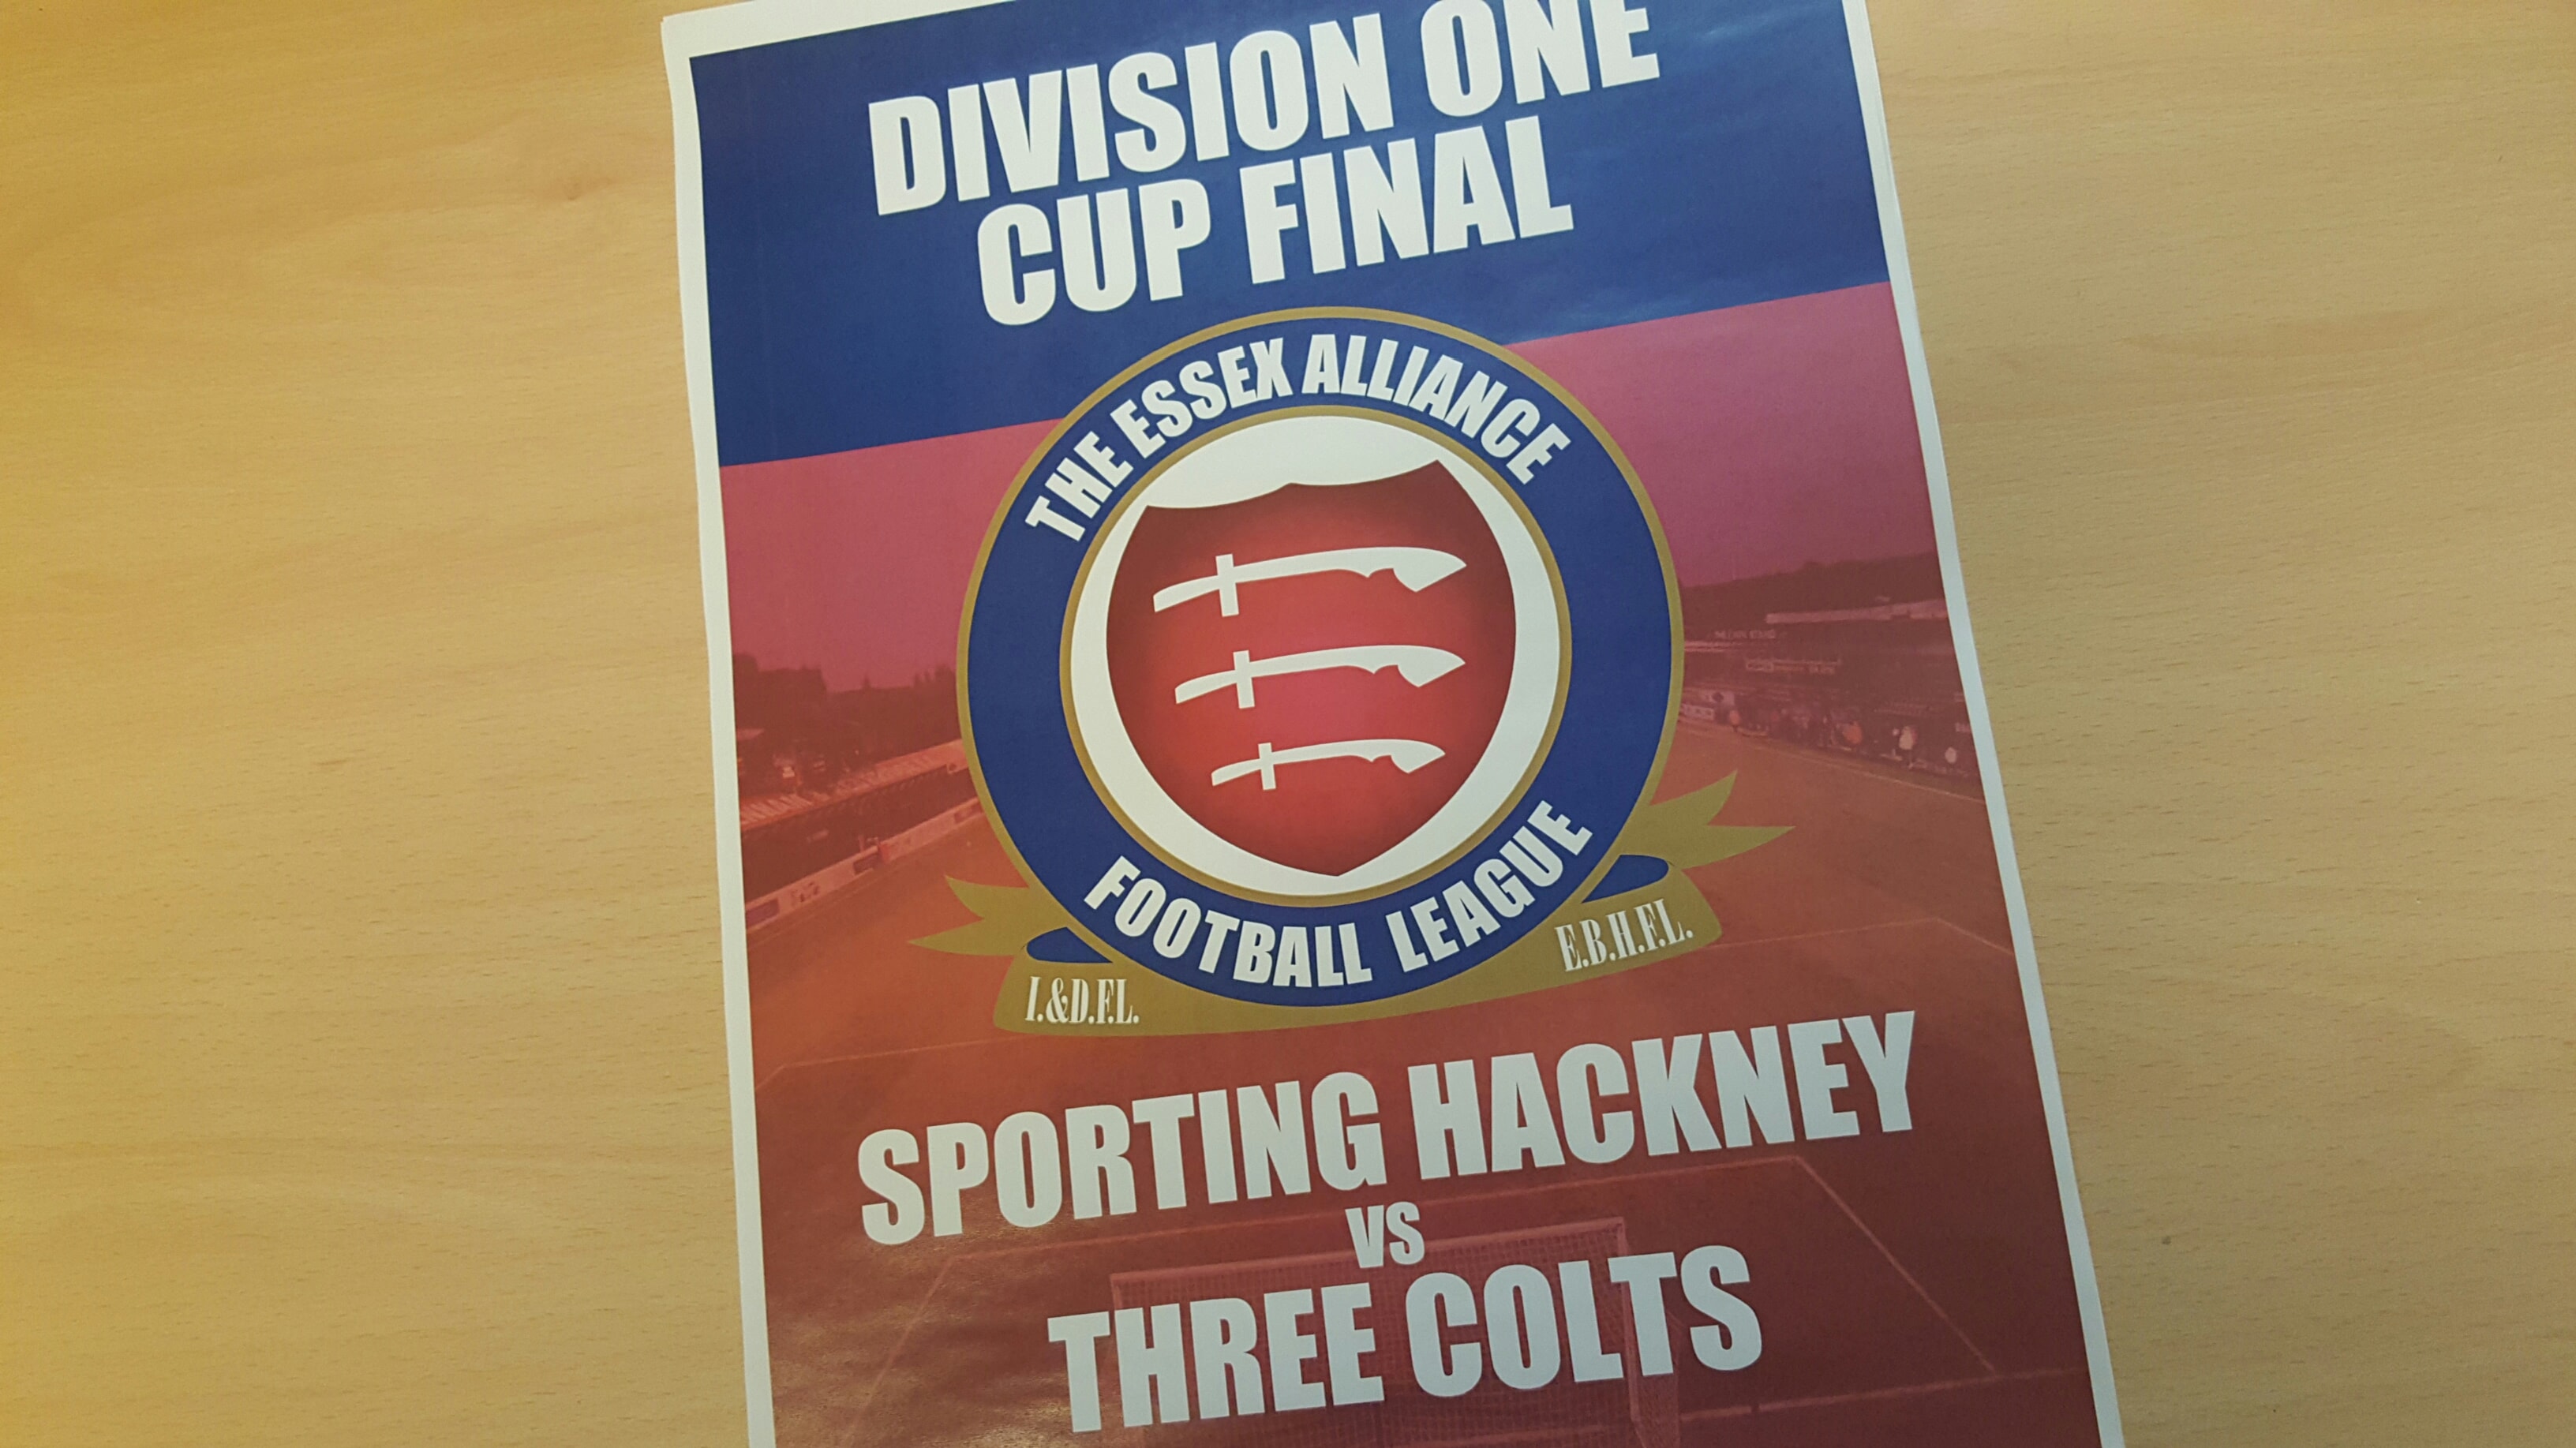 CUP FINAL PREVIEW: Sporting Hackney and Three Colts do battle for the Division 1 Cup 